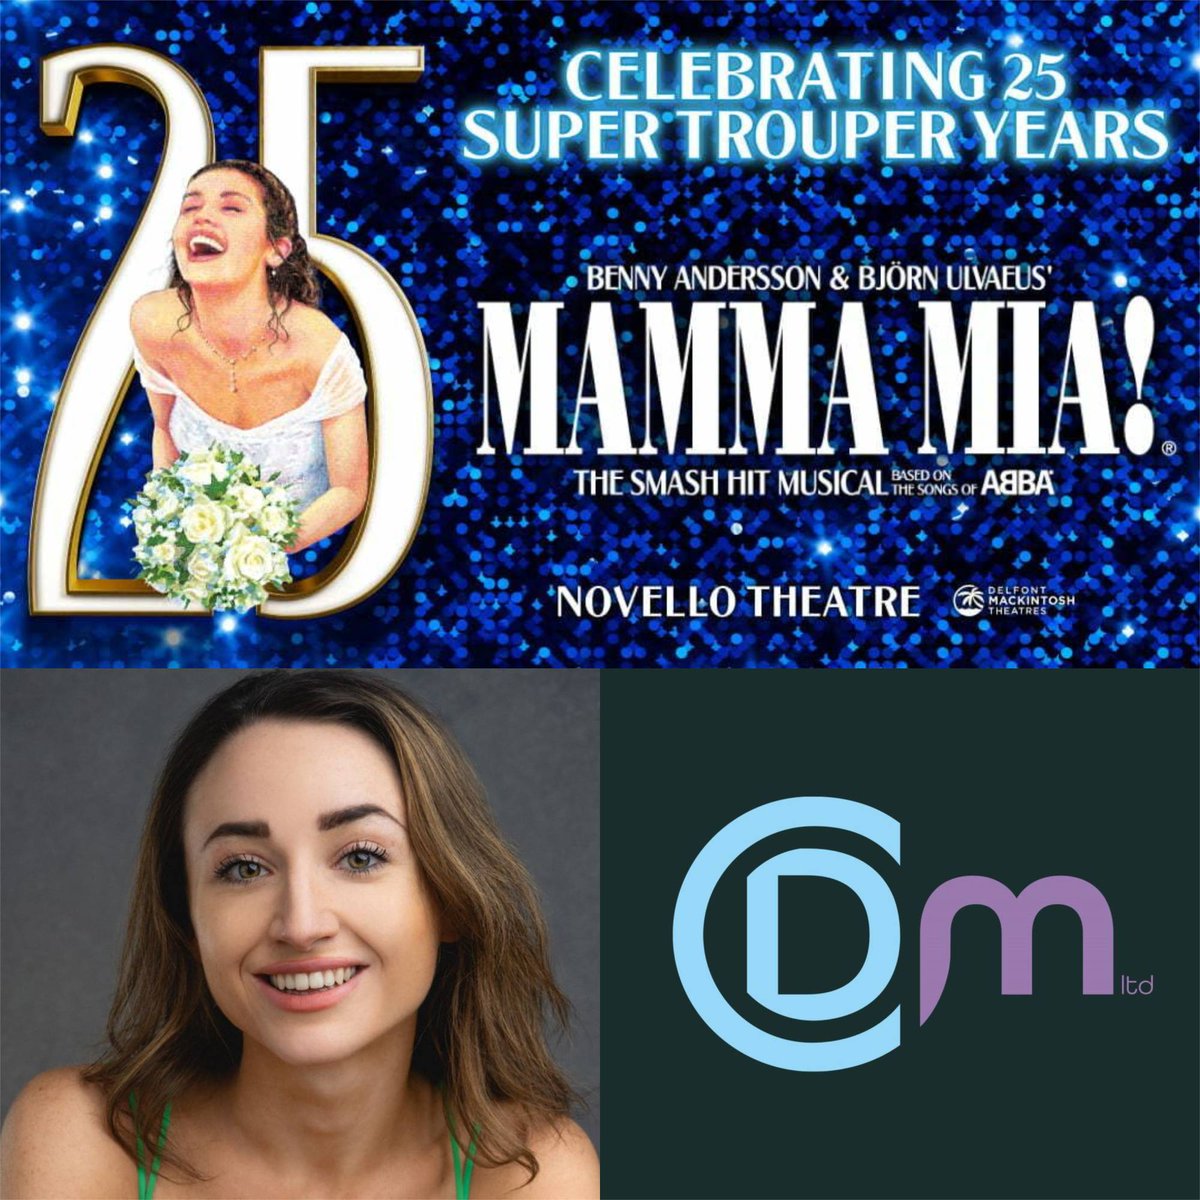 Congratulations Mamma Mia! for 25 'Super Trouper' years in London's West End. The production currently at the Novello Theatre features CDM client HAYLEY-JO MURPHY (@Hayleyjomurphy) as Ensemble/4th cover Tanya. @MammaMiaMusical